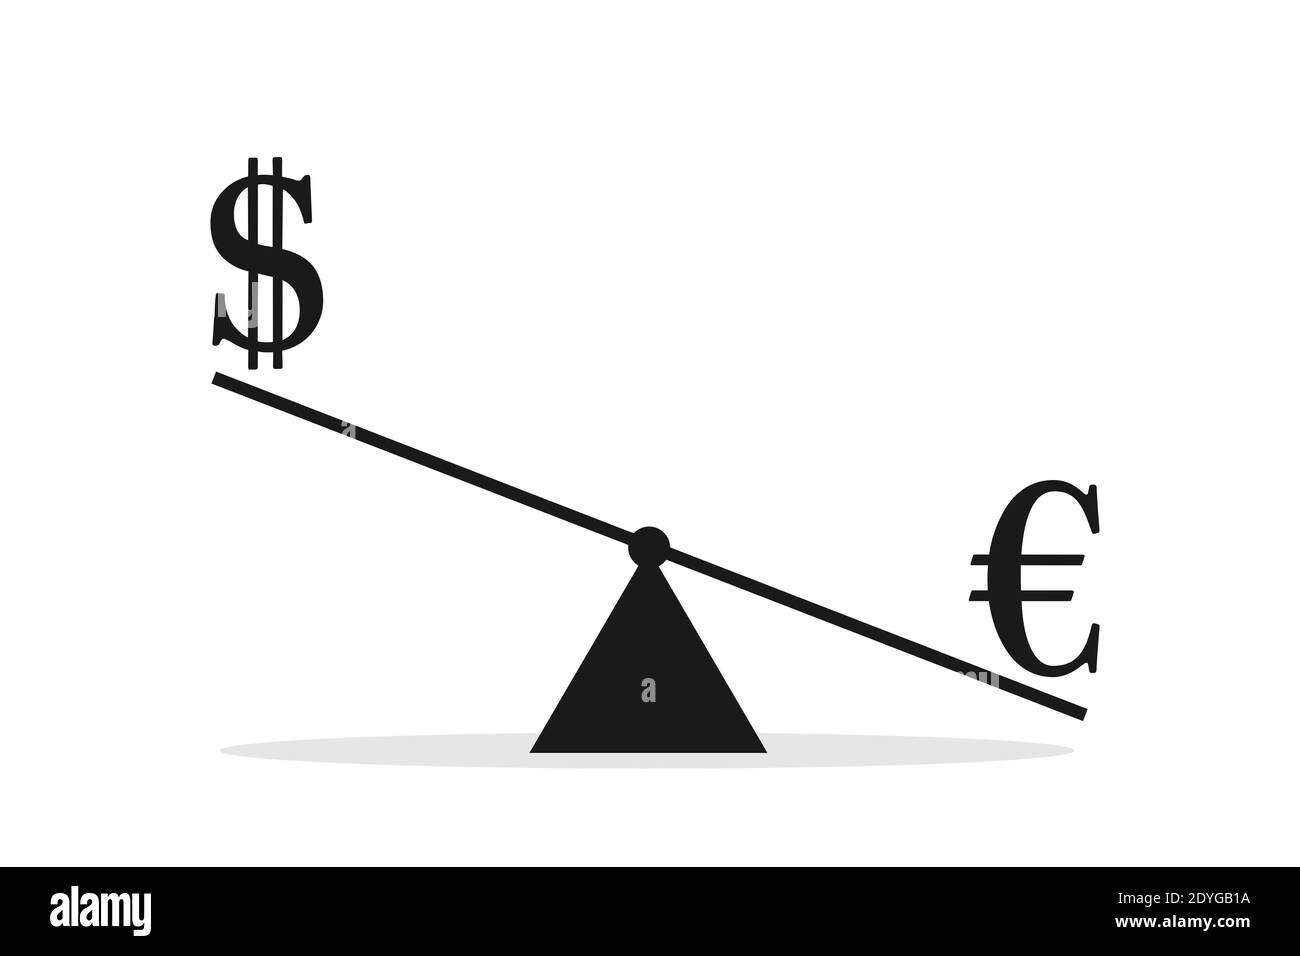 US dollar and euro are compared on weight and scale. Comparison of value and valuation of currency. Vector illustration isolated on white. Stock Photo